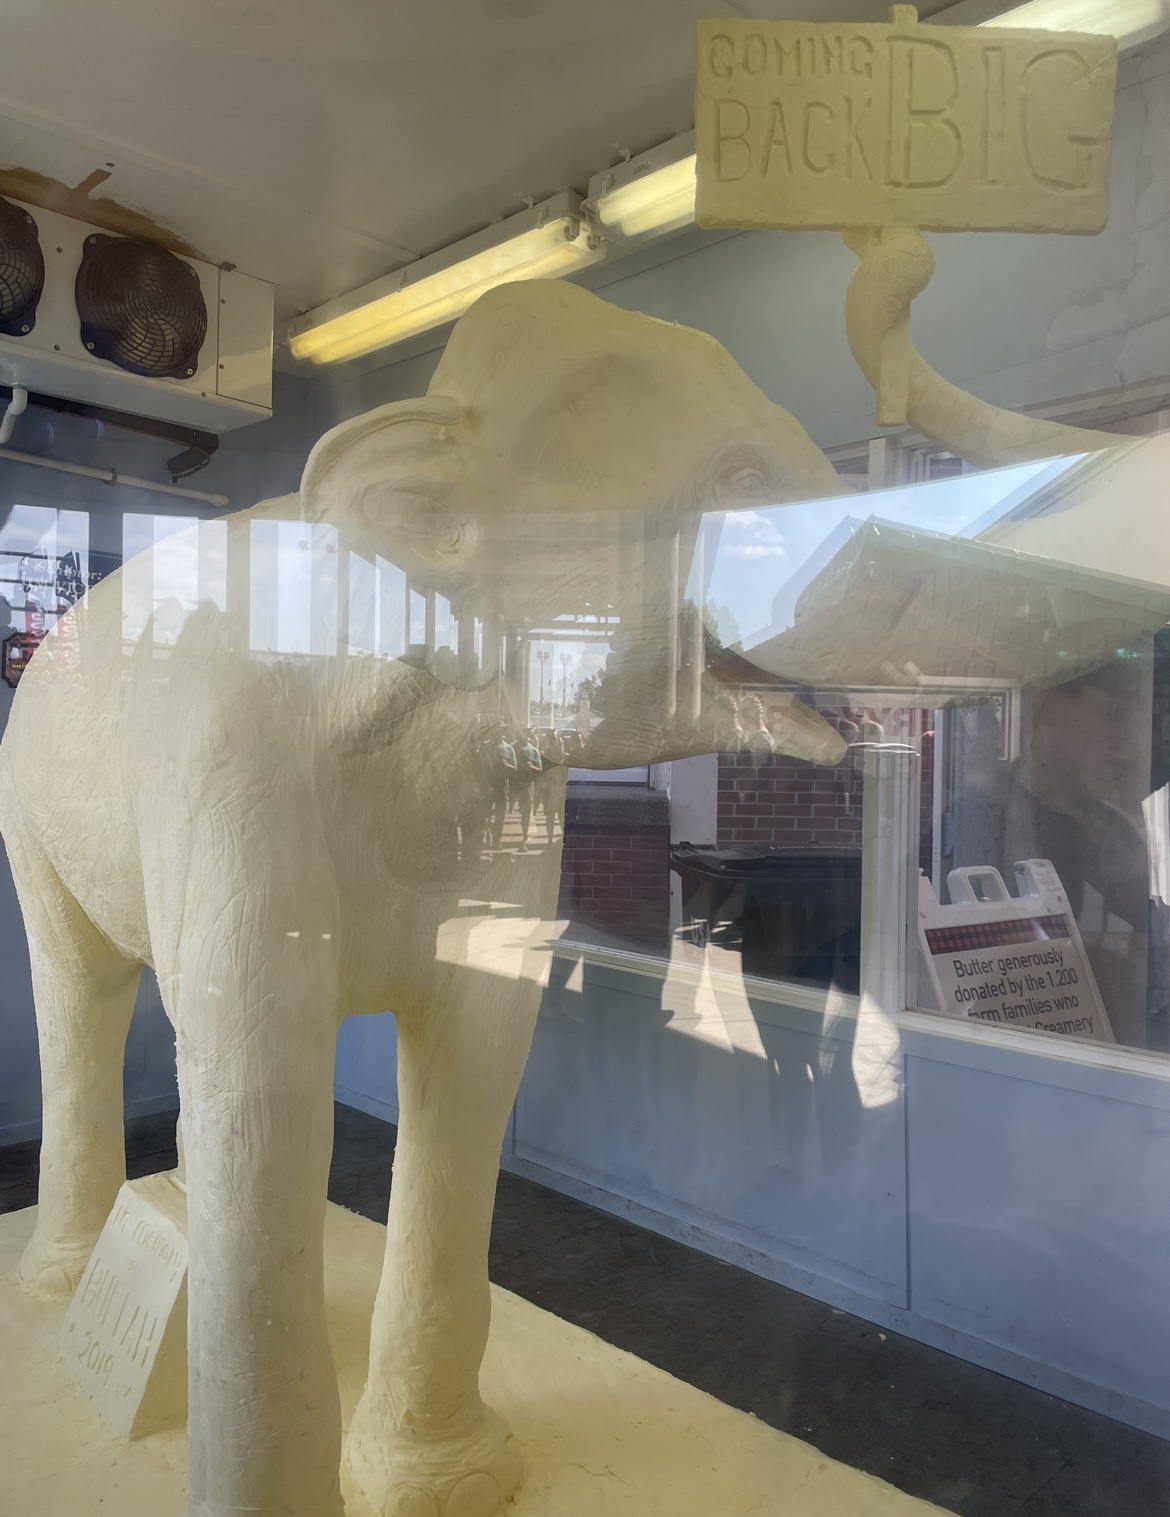  Image of a butter sculpture of an elephant holding a sign that says COMING BACK BIG.